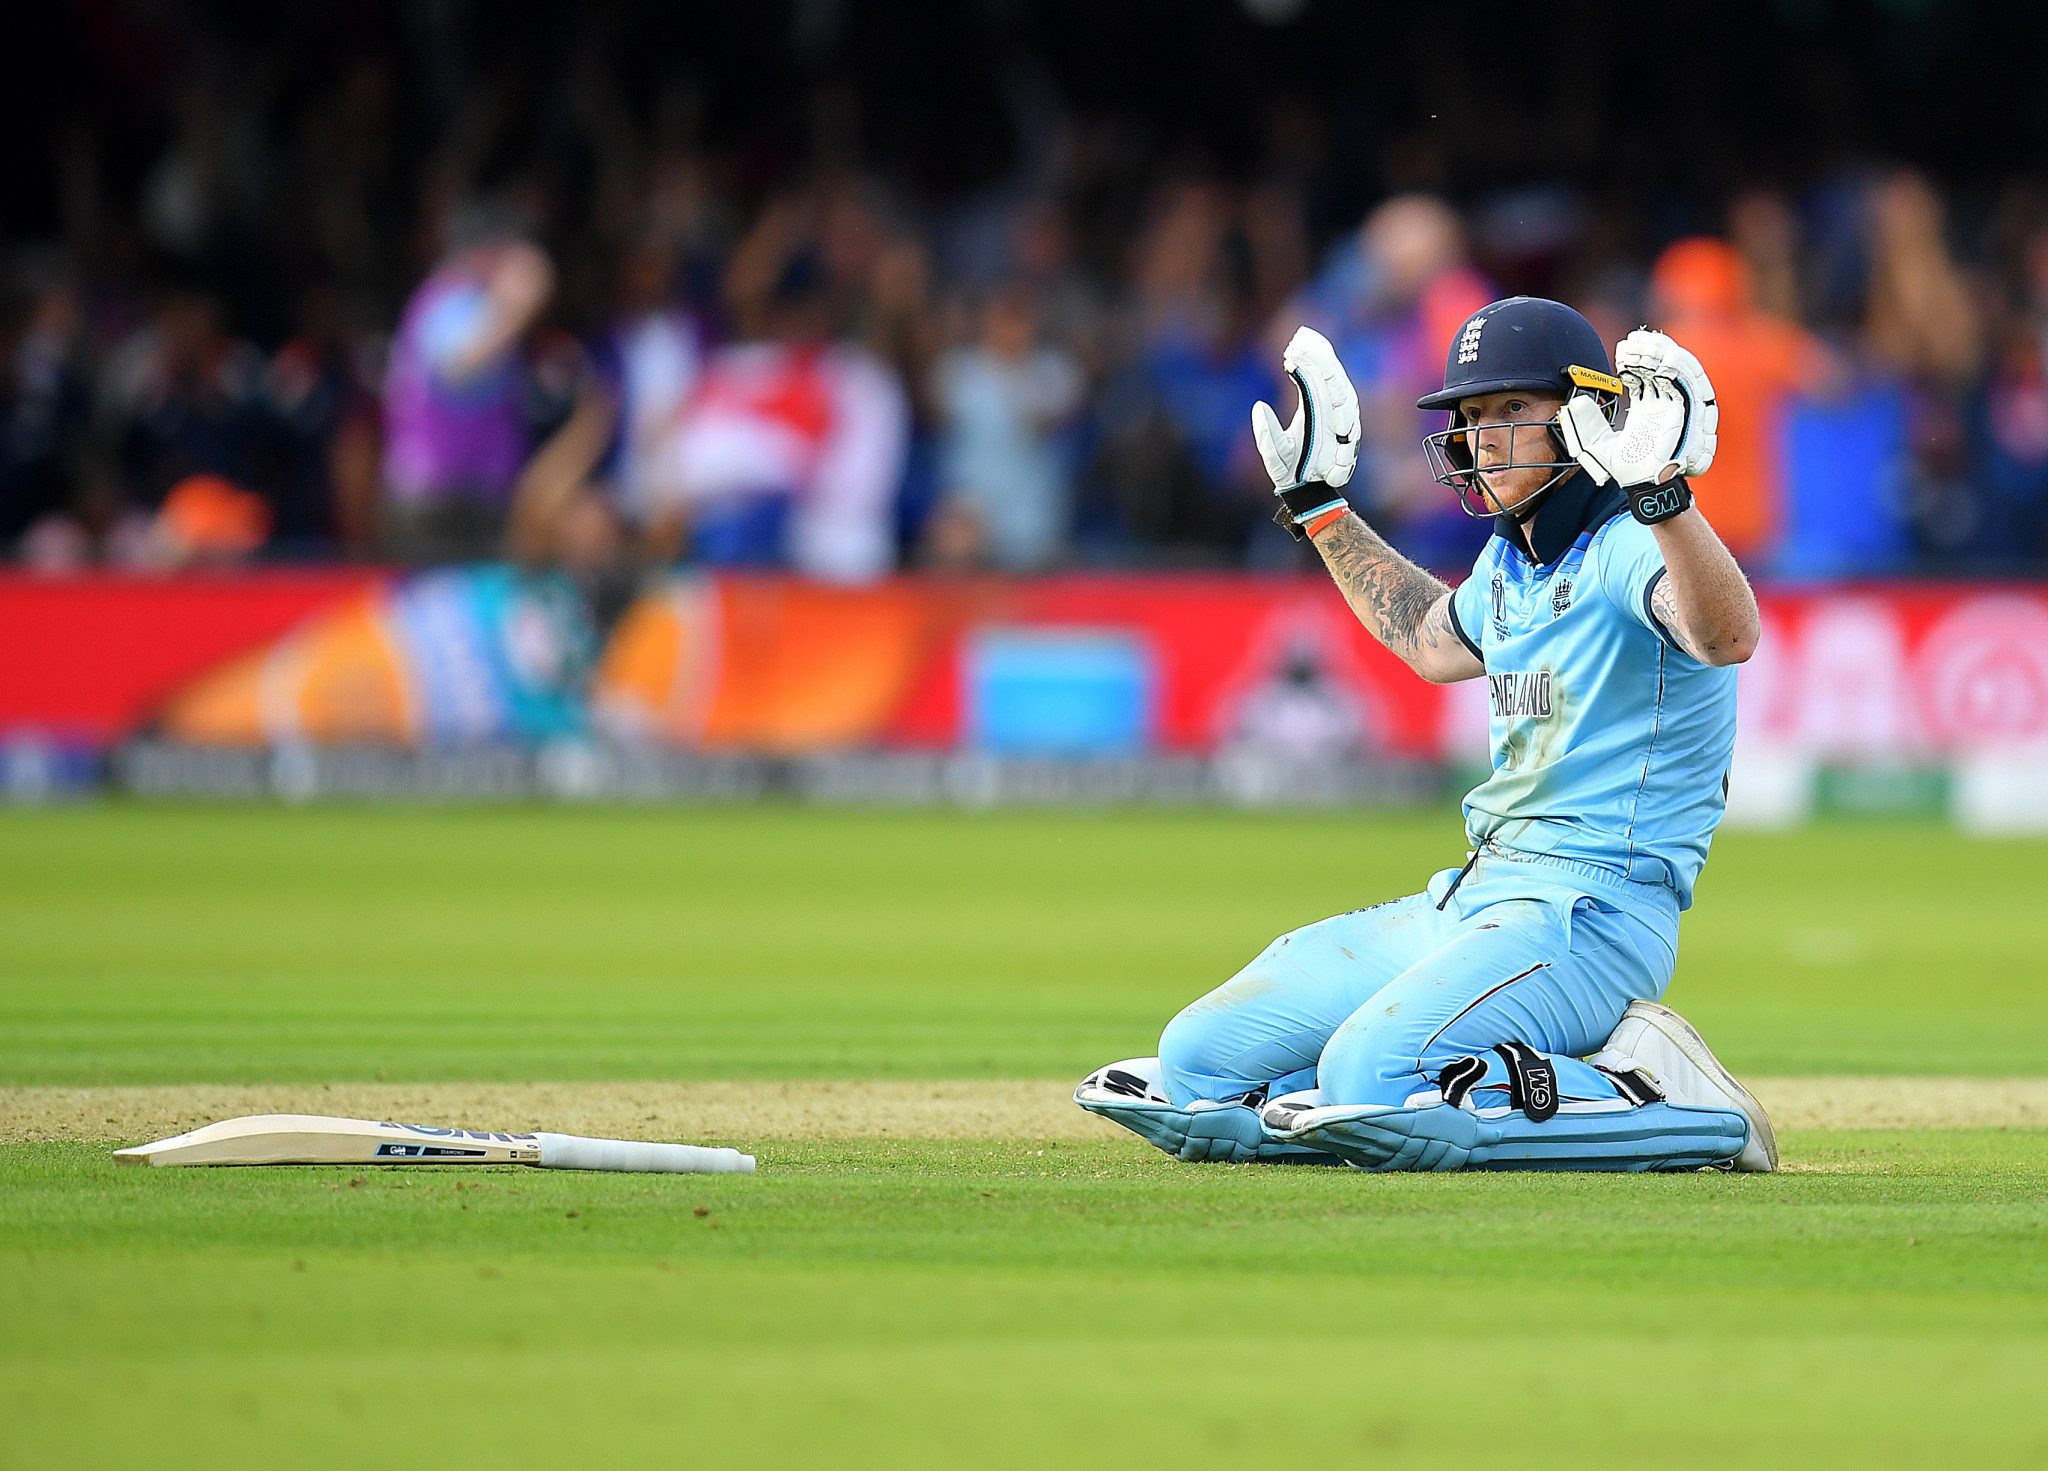 The Cricket World Cup final between England and New Zealand produced scarcely believable drama ©Getty Images